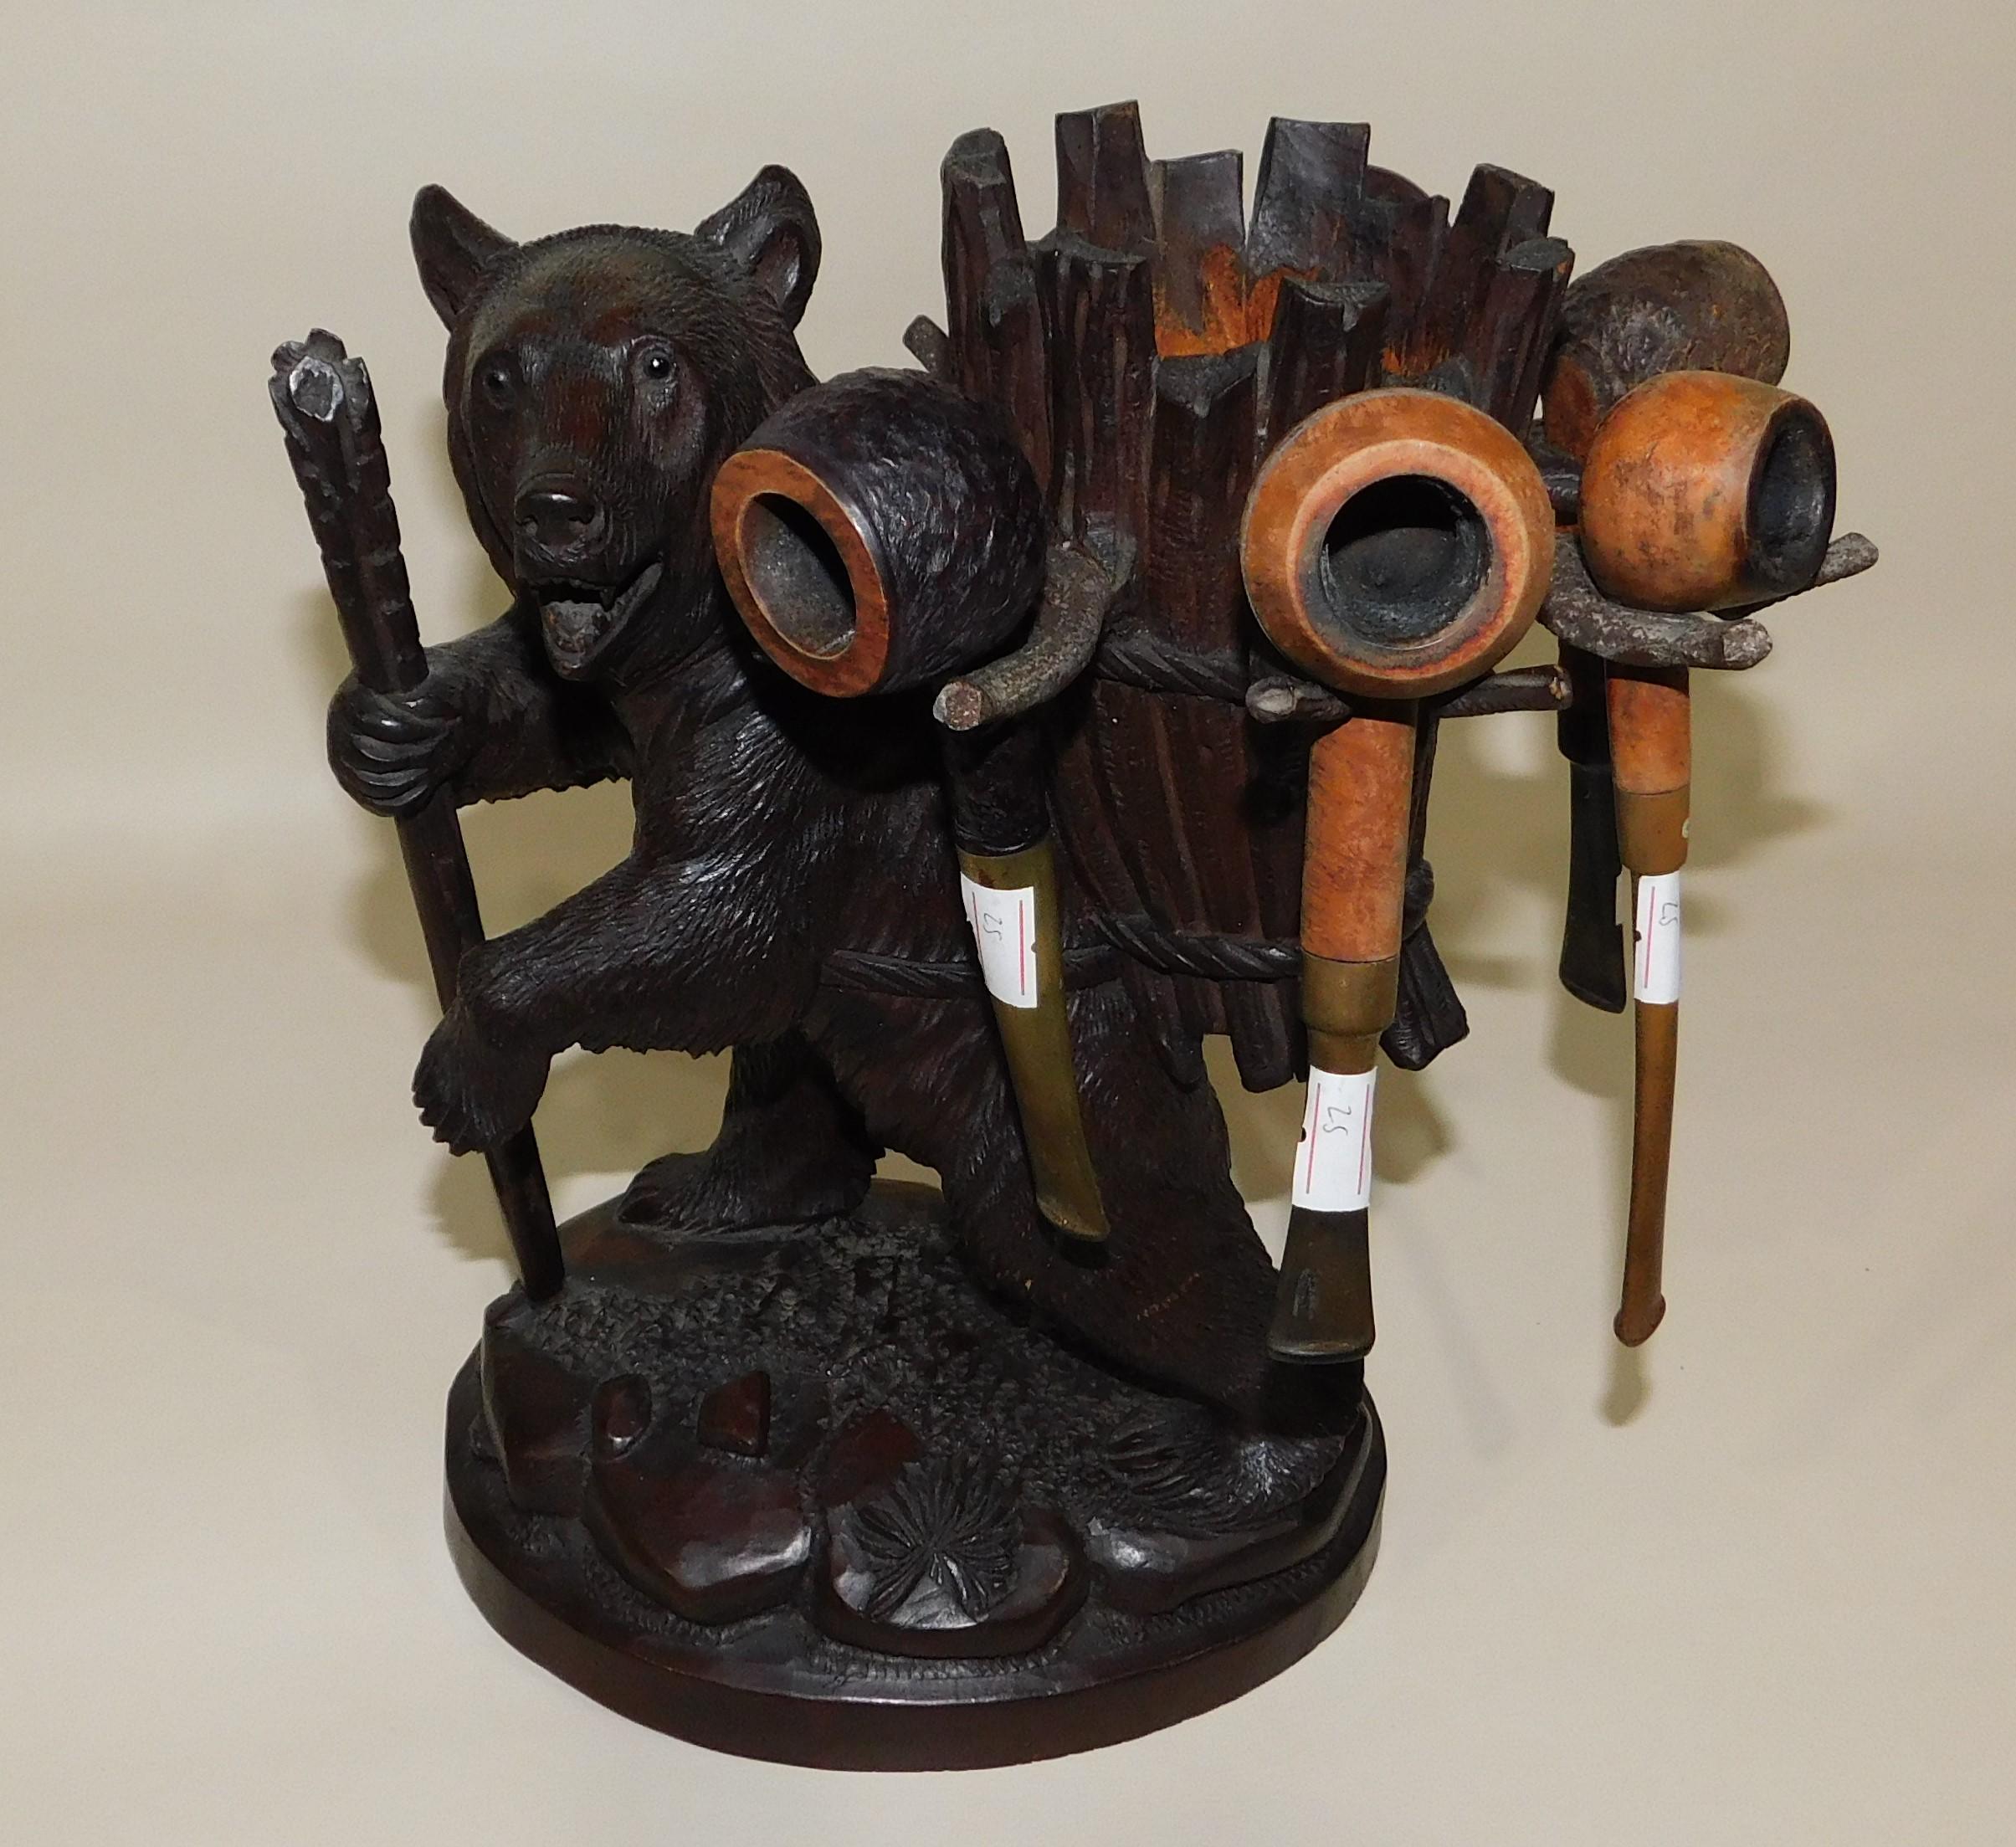 Black Forest hand-carved linden-wood hand-carved pipe tobacco holder stand also have seen examples of it used as a decanter or liqueur Stand with the holders being used for shot or small glasses. Modeled as hiking bear with walking stick and basket